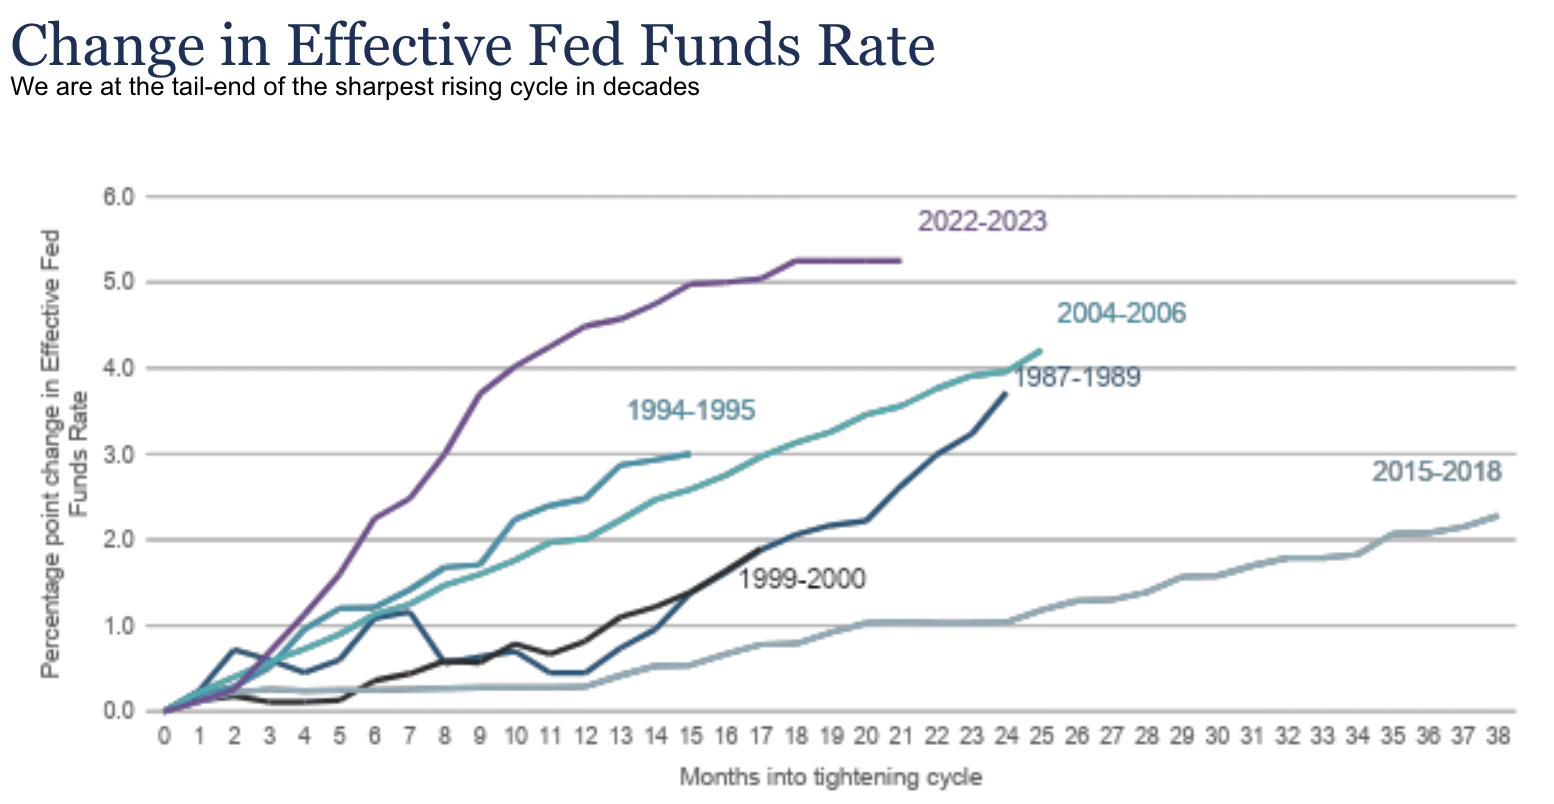 Source: St. Louis Fed